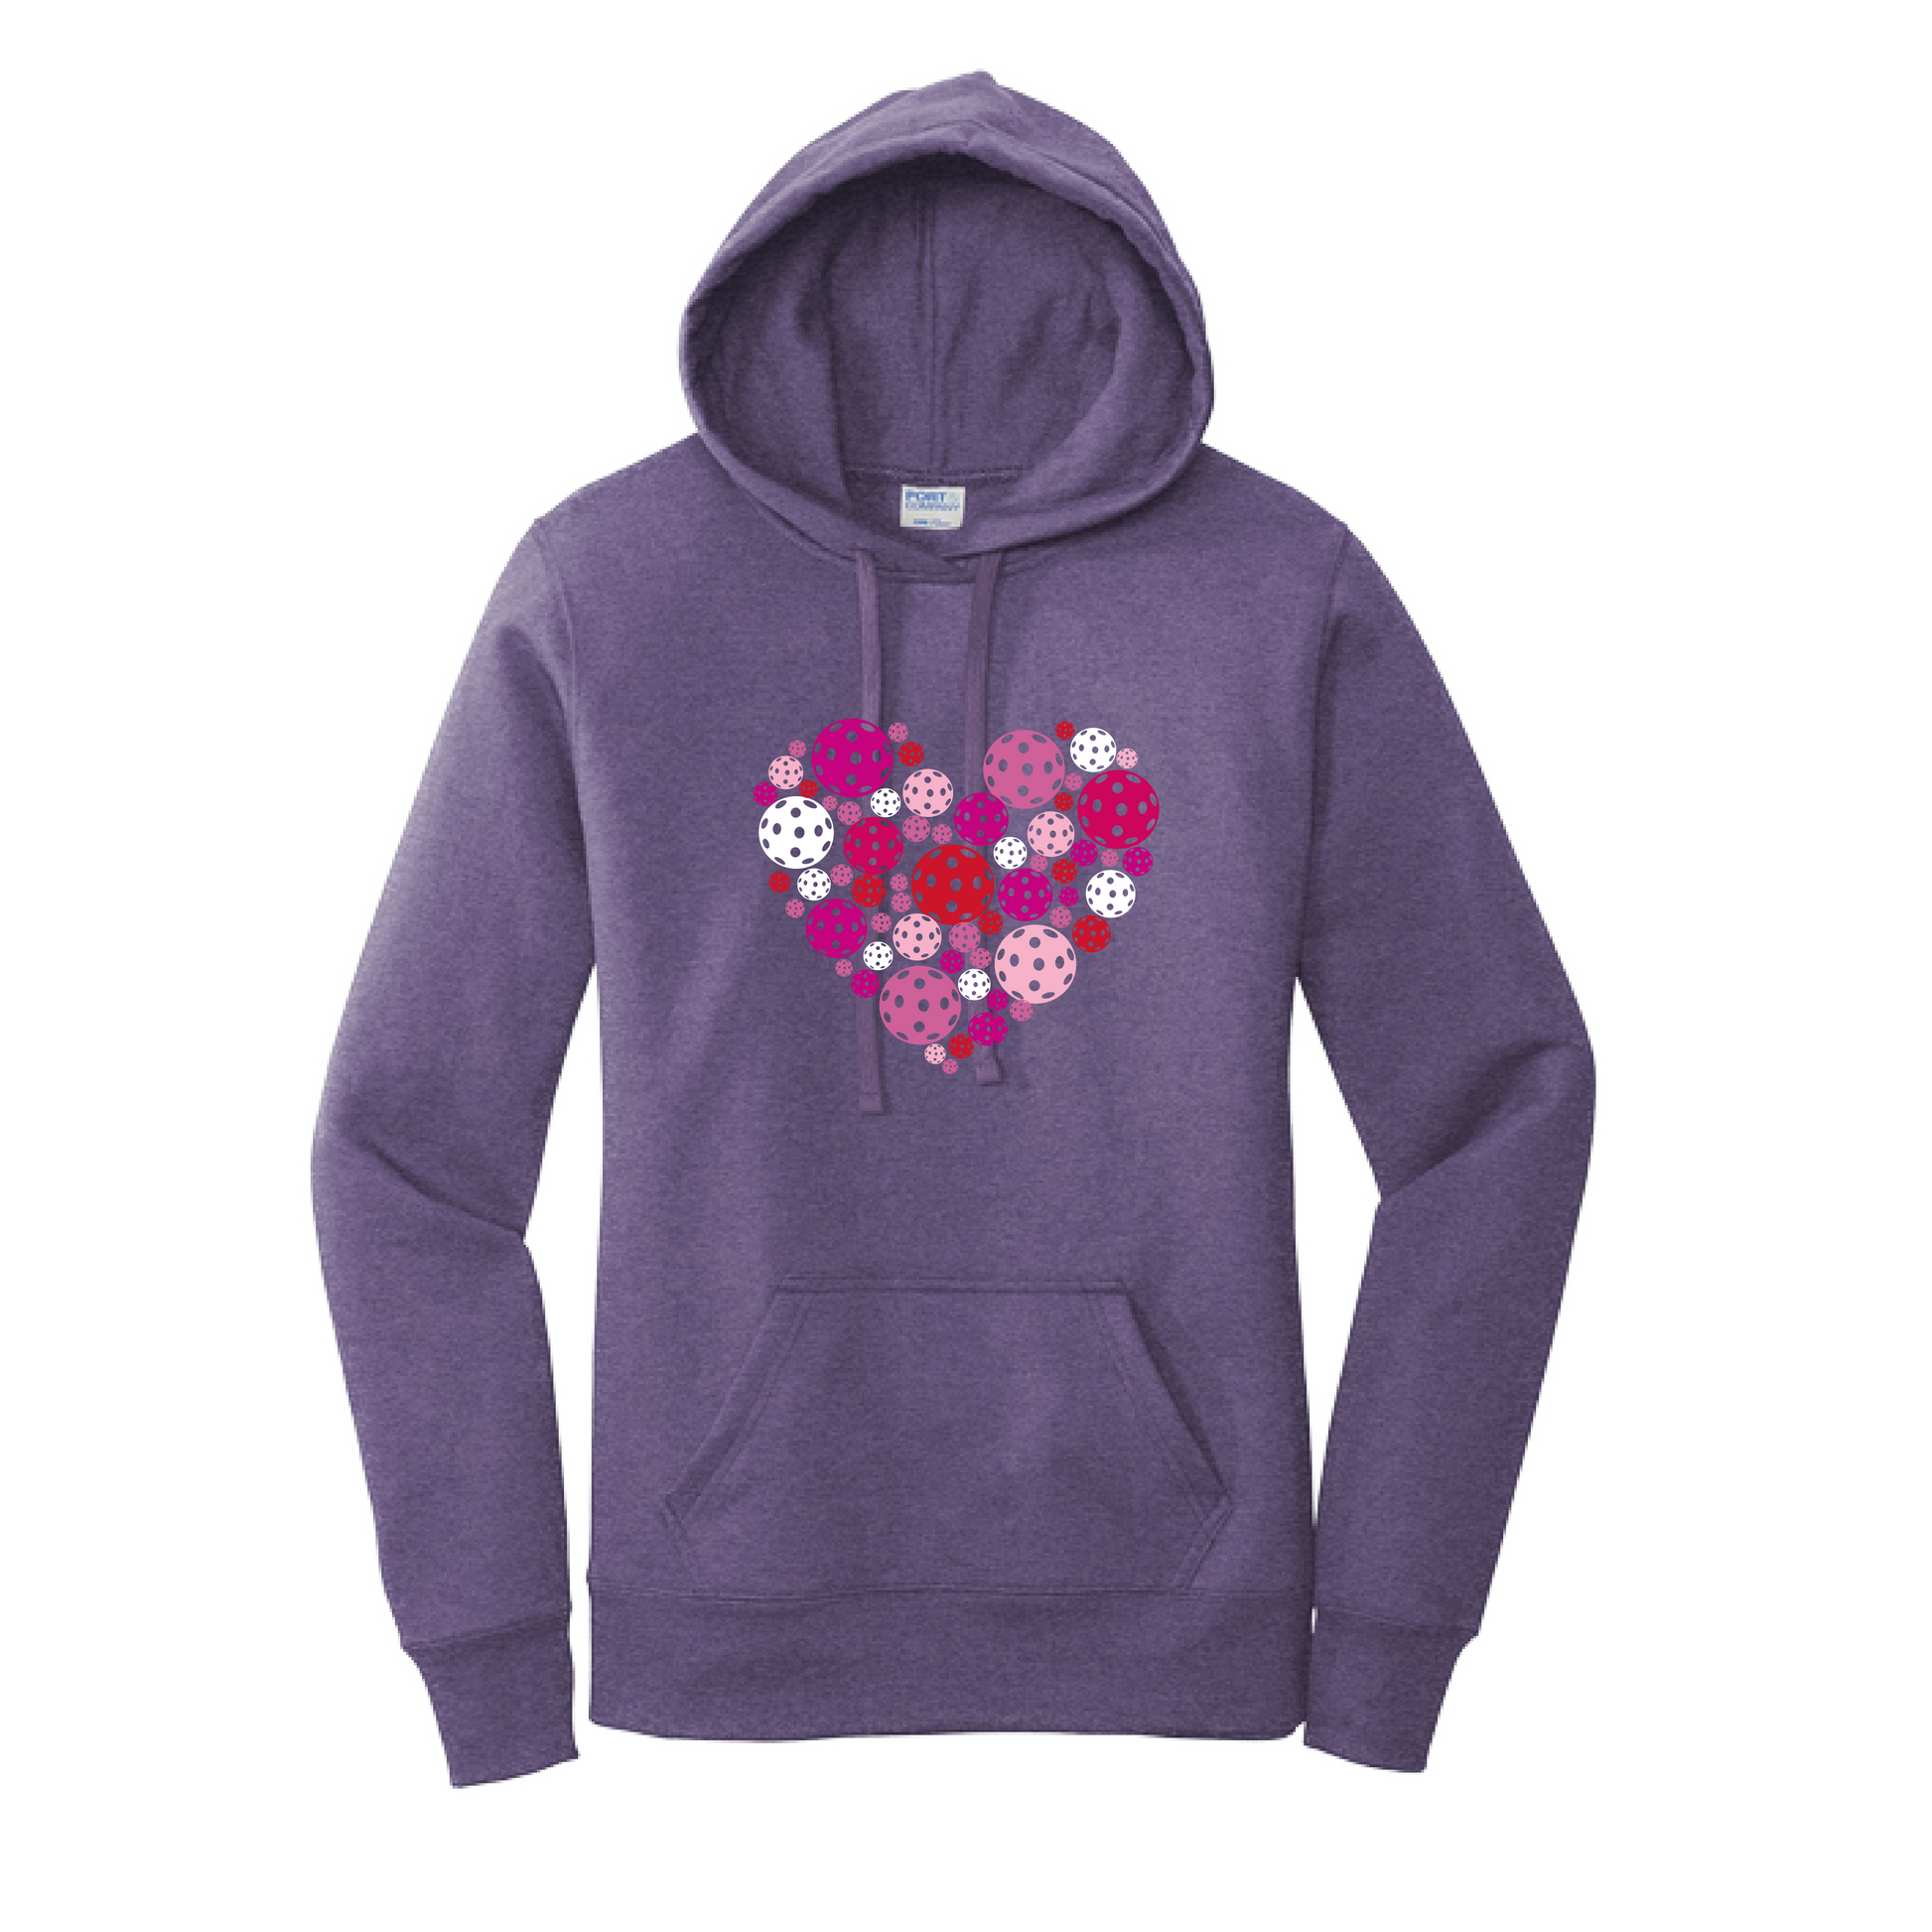 This Women's Fitted Hoodie Sweatshirt will have you cranking up the style! Crafted from a 50/50 Cotton/Poly blend, the ultra-soft lined interior and cozy hood will keep you comfy while the front pouch pocket amps up your look. Show off your figure in style.